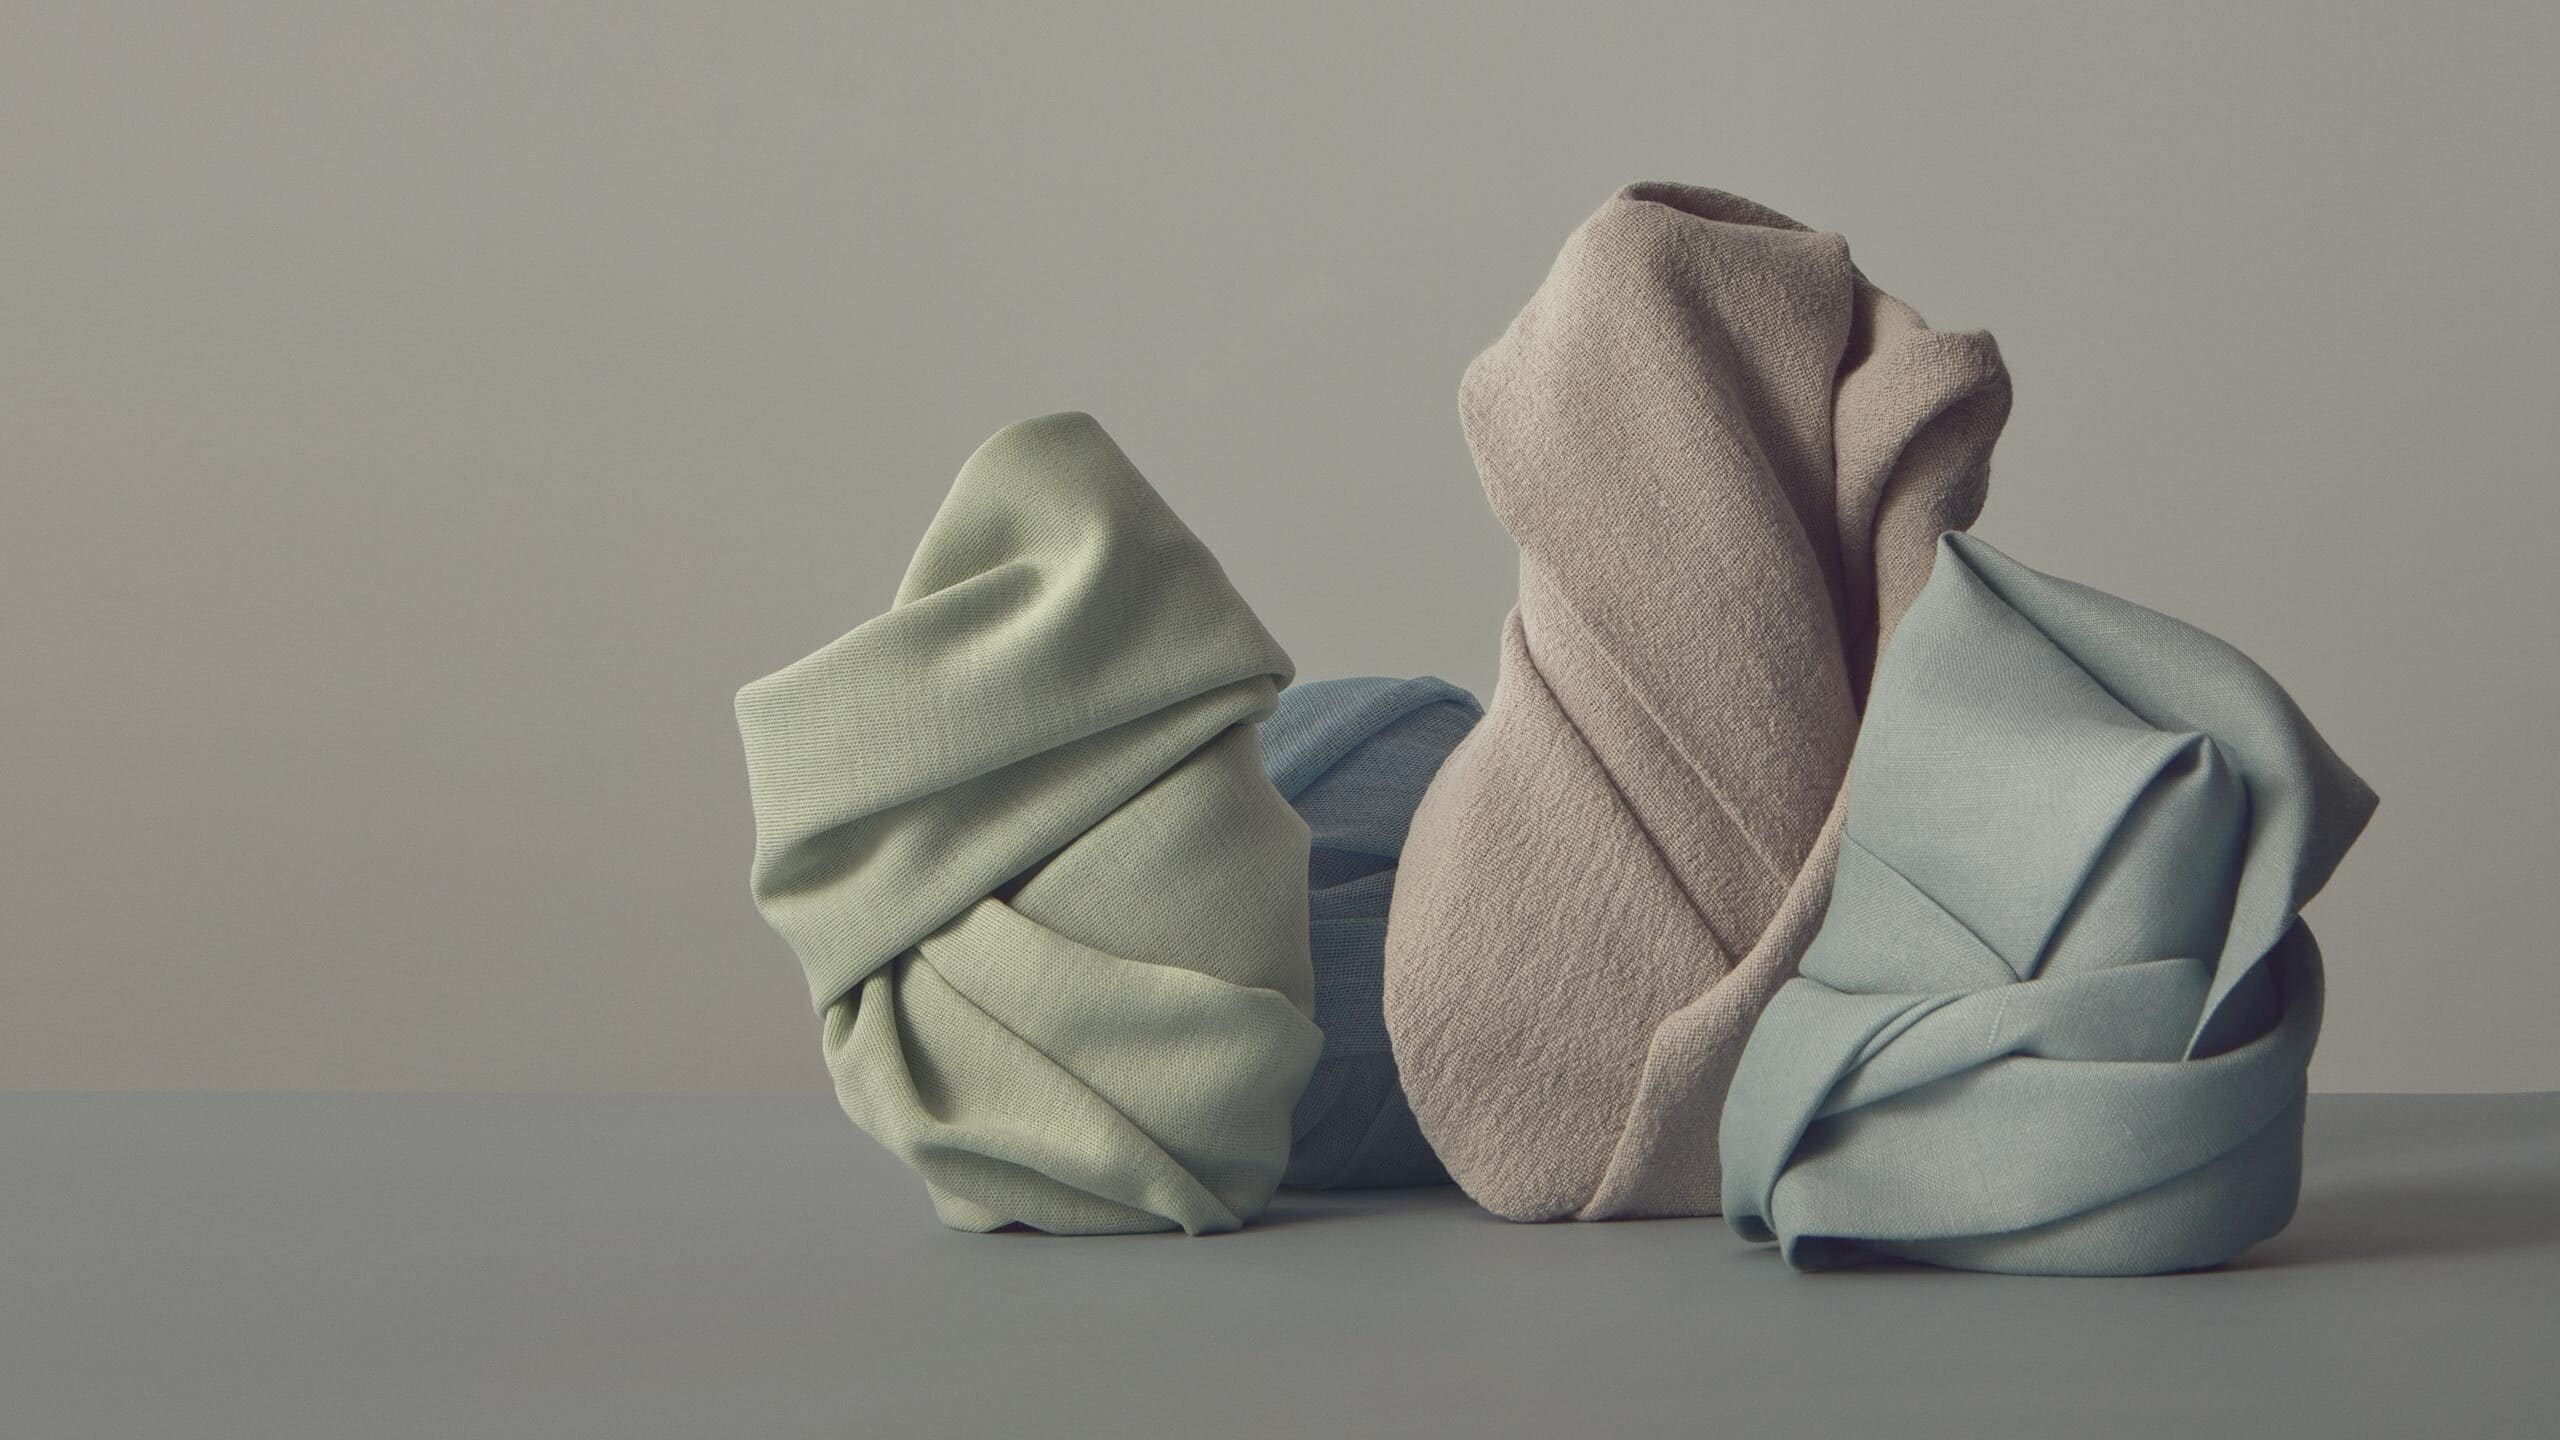 Four objects of various sizes wrapped in pastel-coloured cloths.